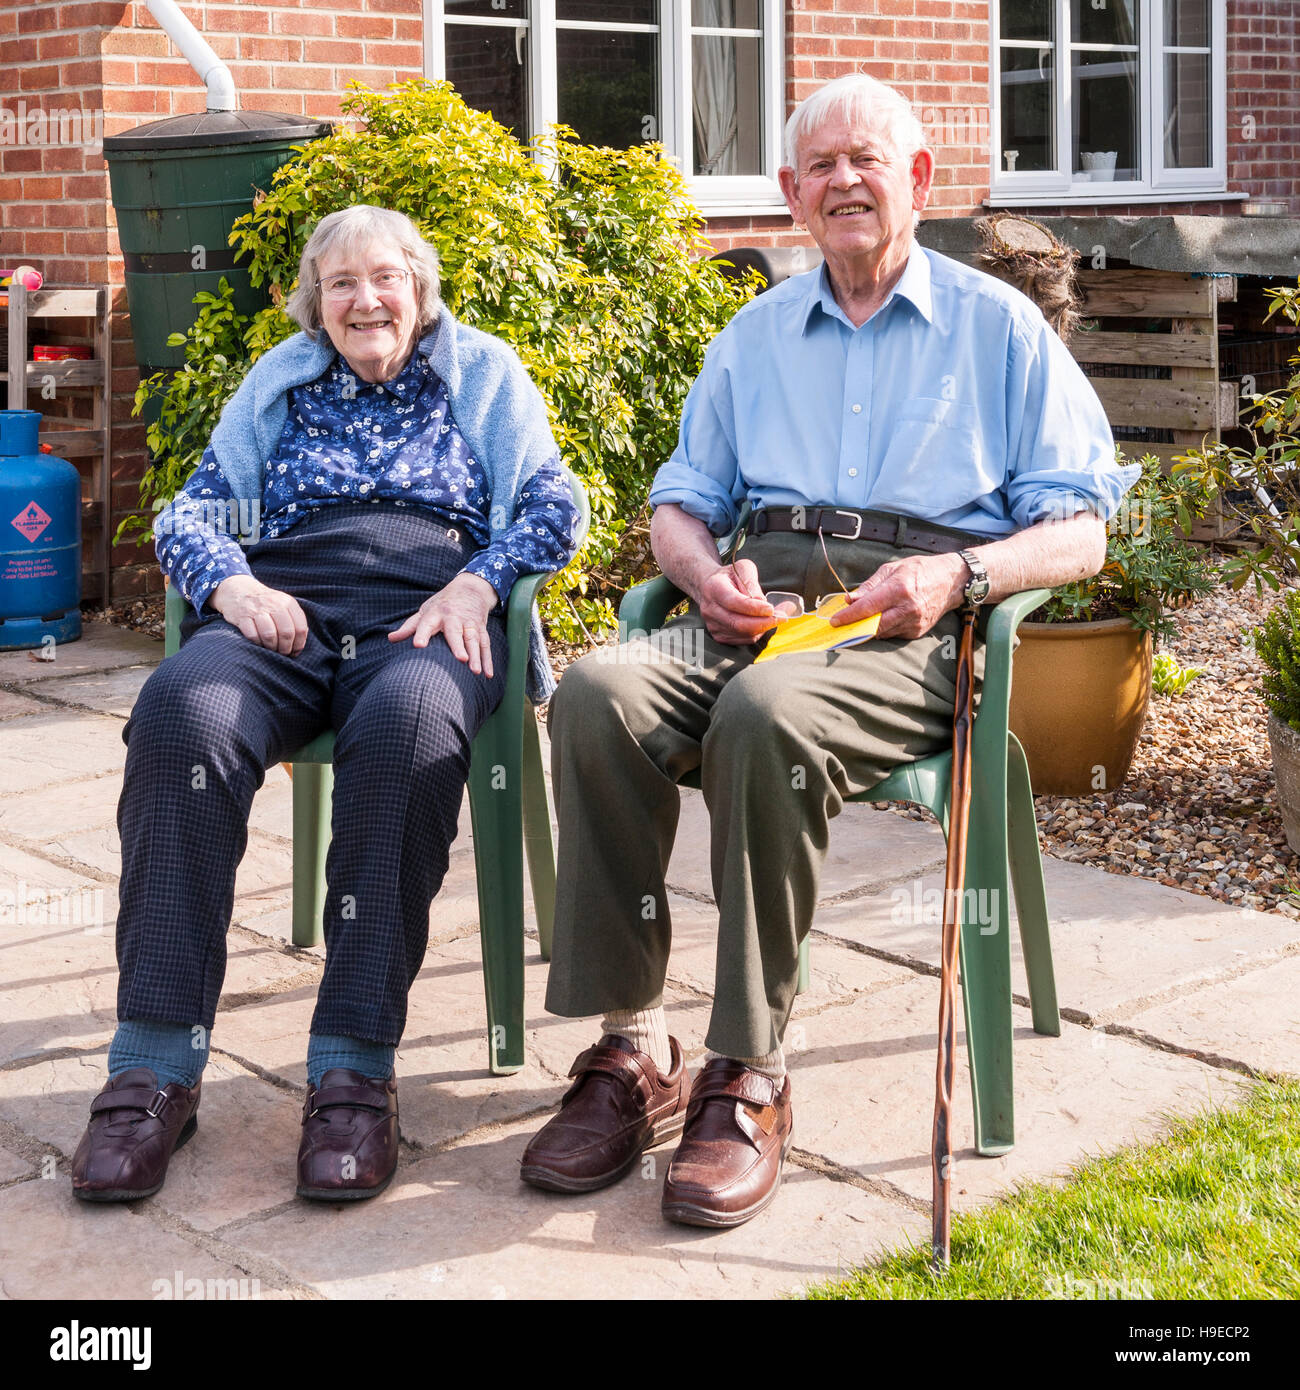 An elderly couple in their 80's in the Uk Stock Photo